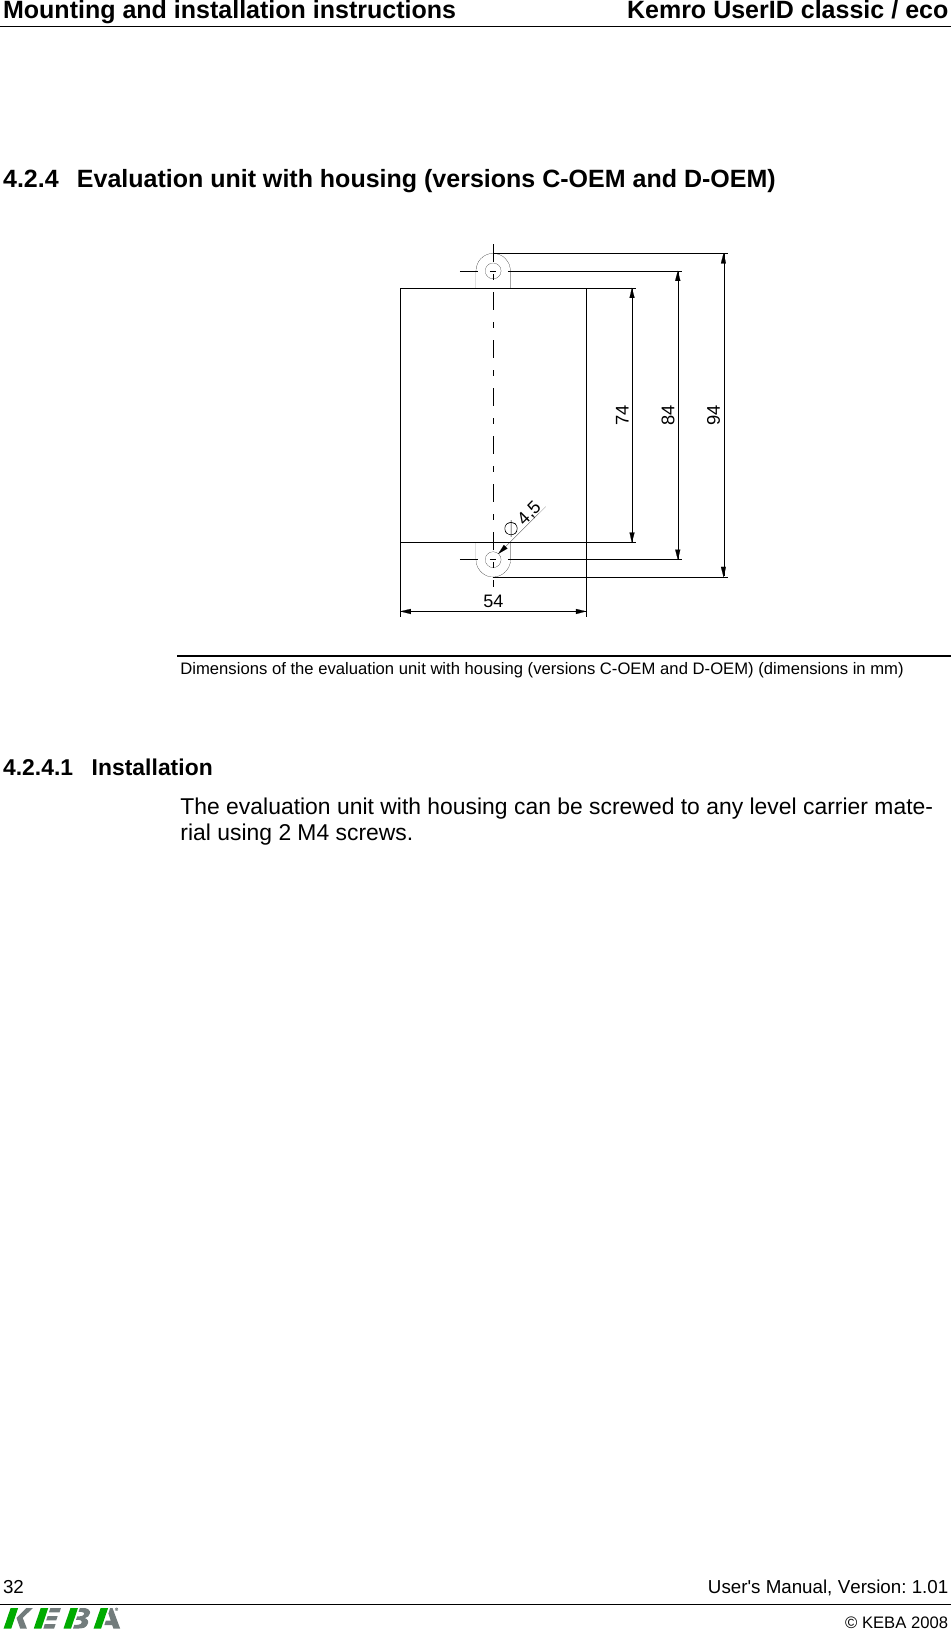 Mounting and installation instructions  Kemro UserID classic / eco 32  User&apos;s Manual, Version: 1.01   © KEBA 2008 4.2.4 Evaluation unit with housing (versions C-OEM and D-OEM)  745484944,5 Dimensions of the evaluation unit with housing (versions C-OEM and D-OEM) (dimensions in mm)  4.2.4.1 Installation The evaluation unit with housing can be screwed to any level carrier mate-rial using 2 M4 screws.   